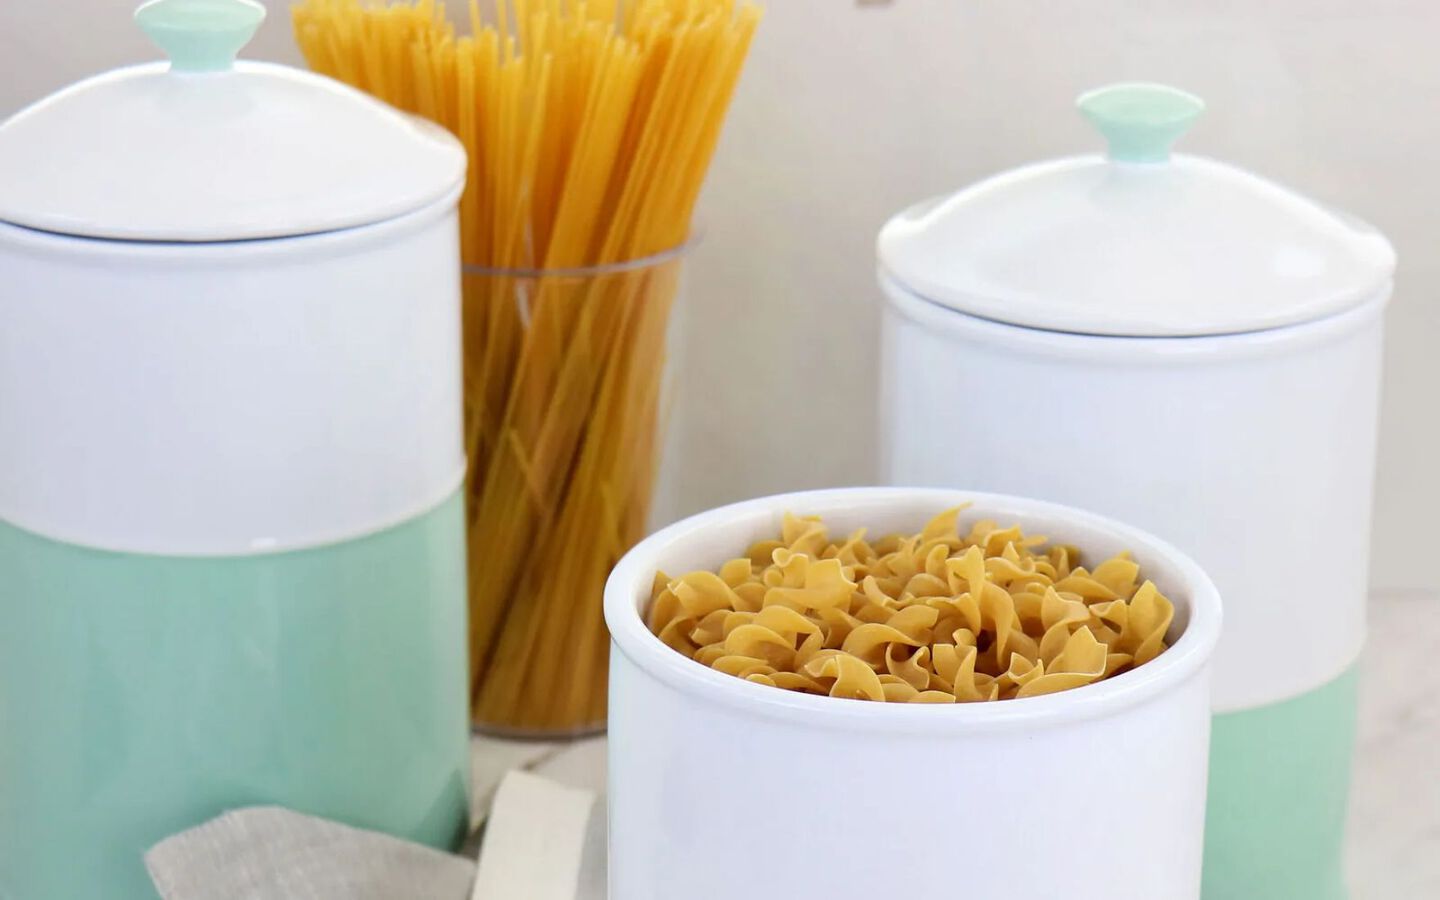 Light mint and white containers filled with uncooked pasta